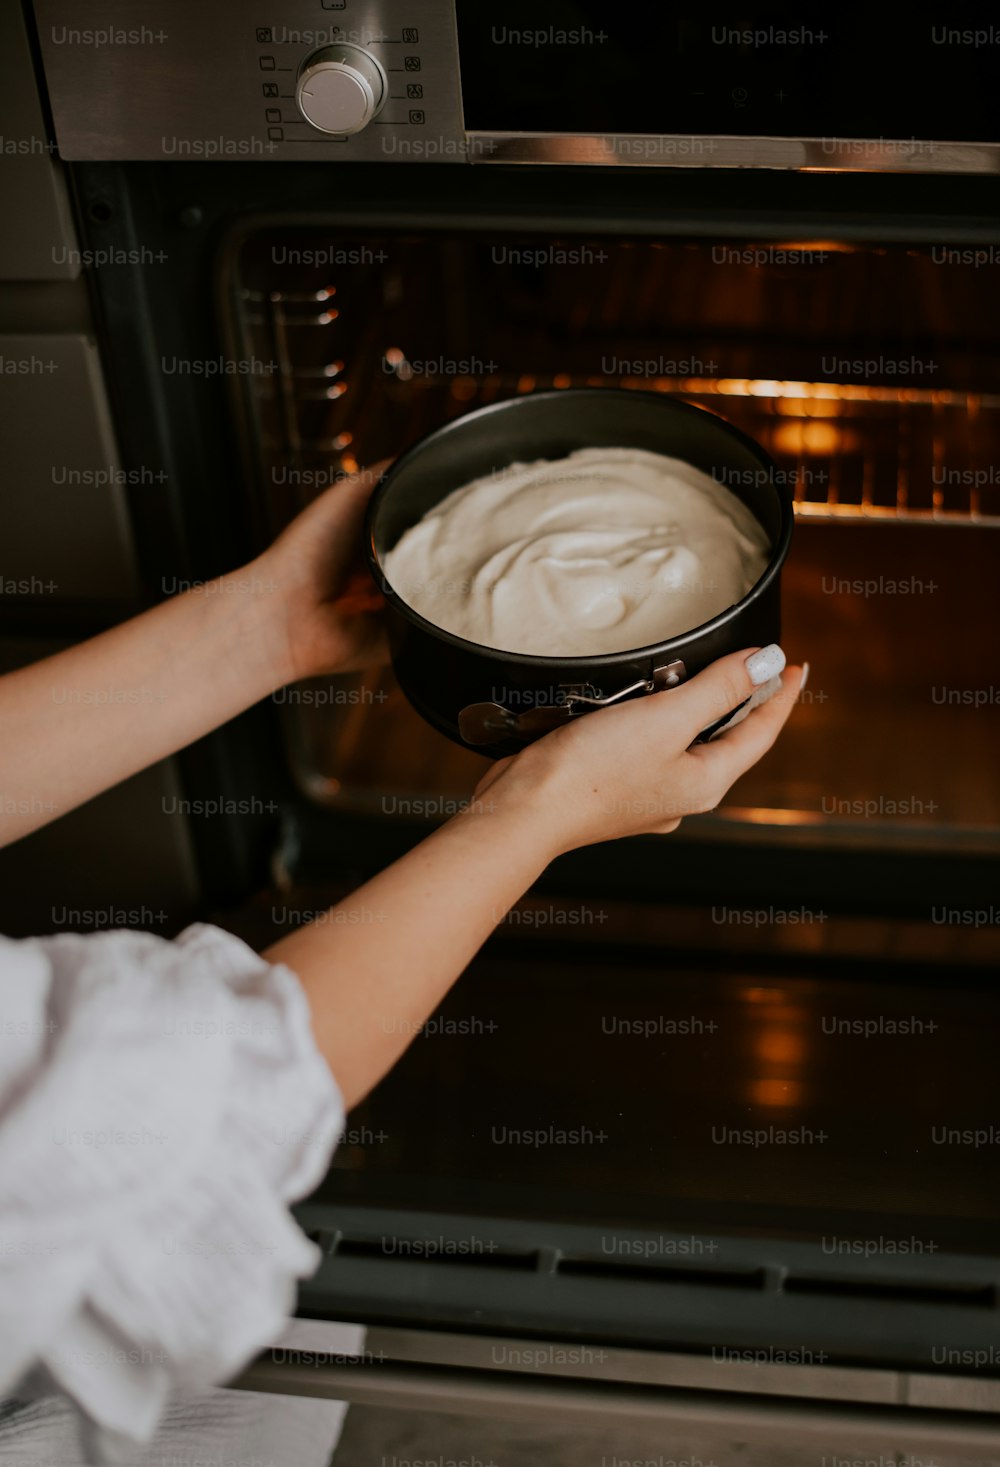 a person holding a pan of food in front of an oven